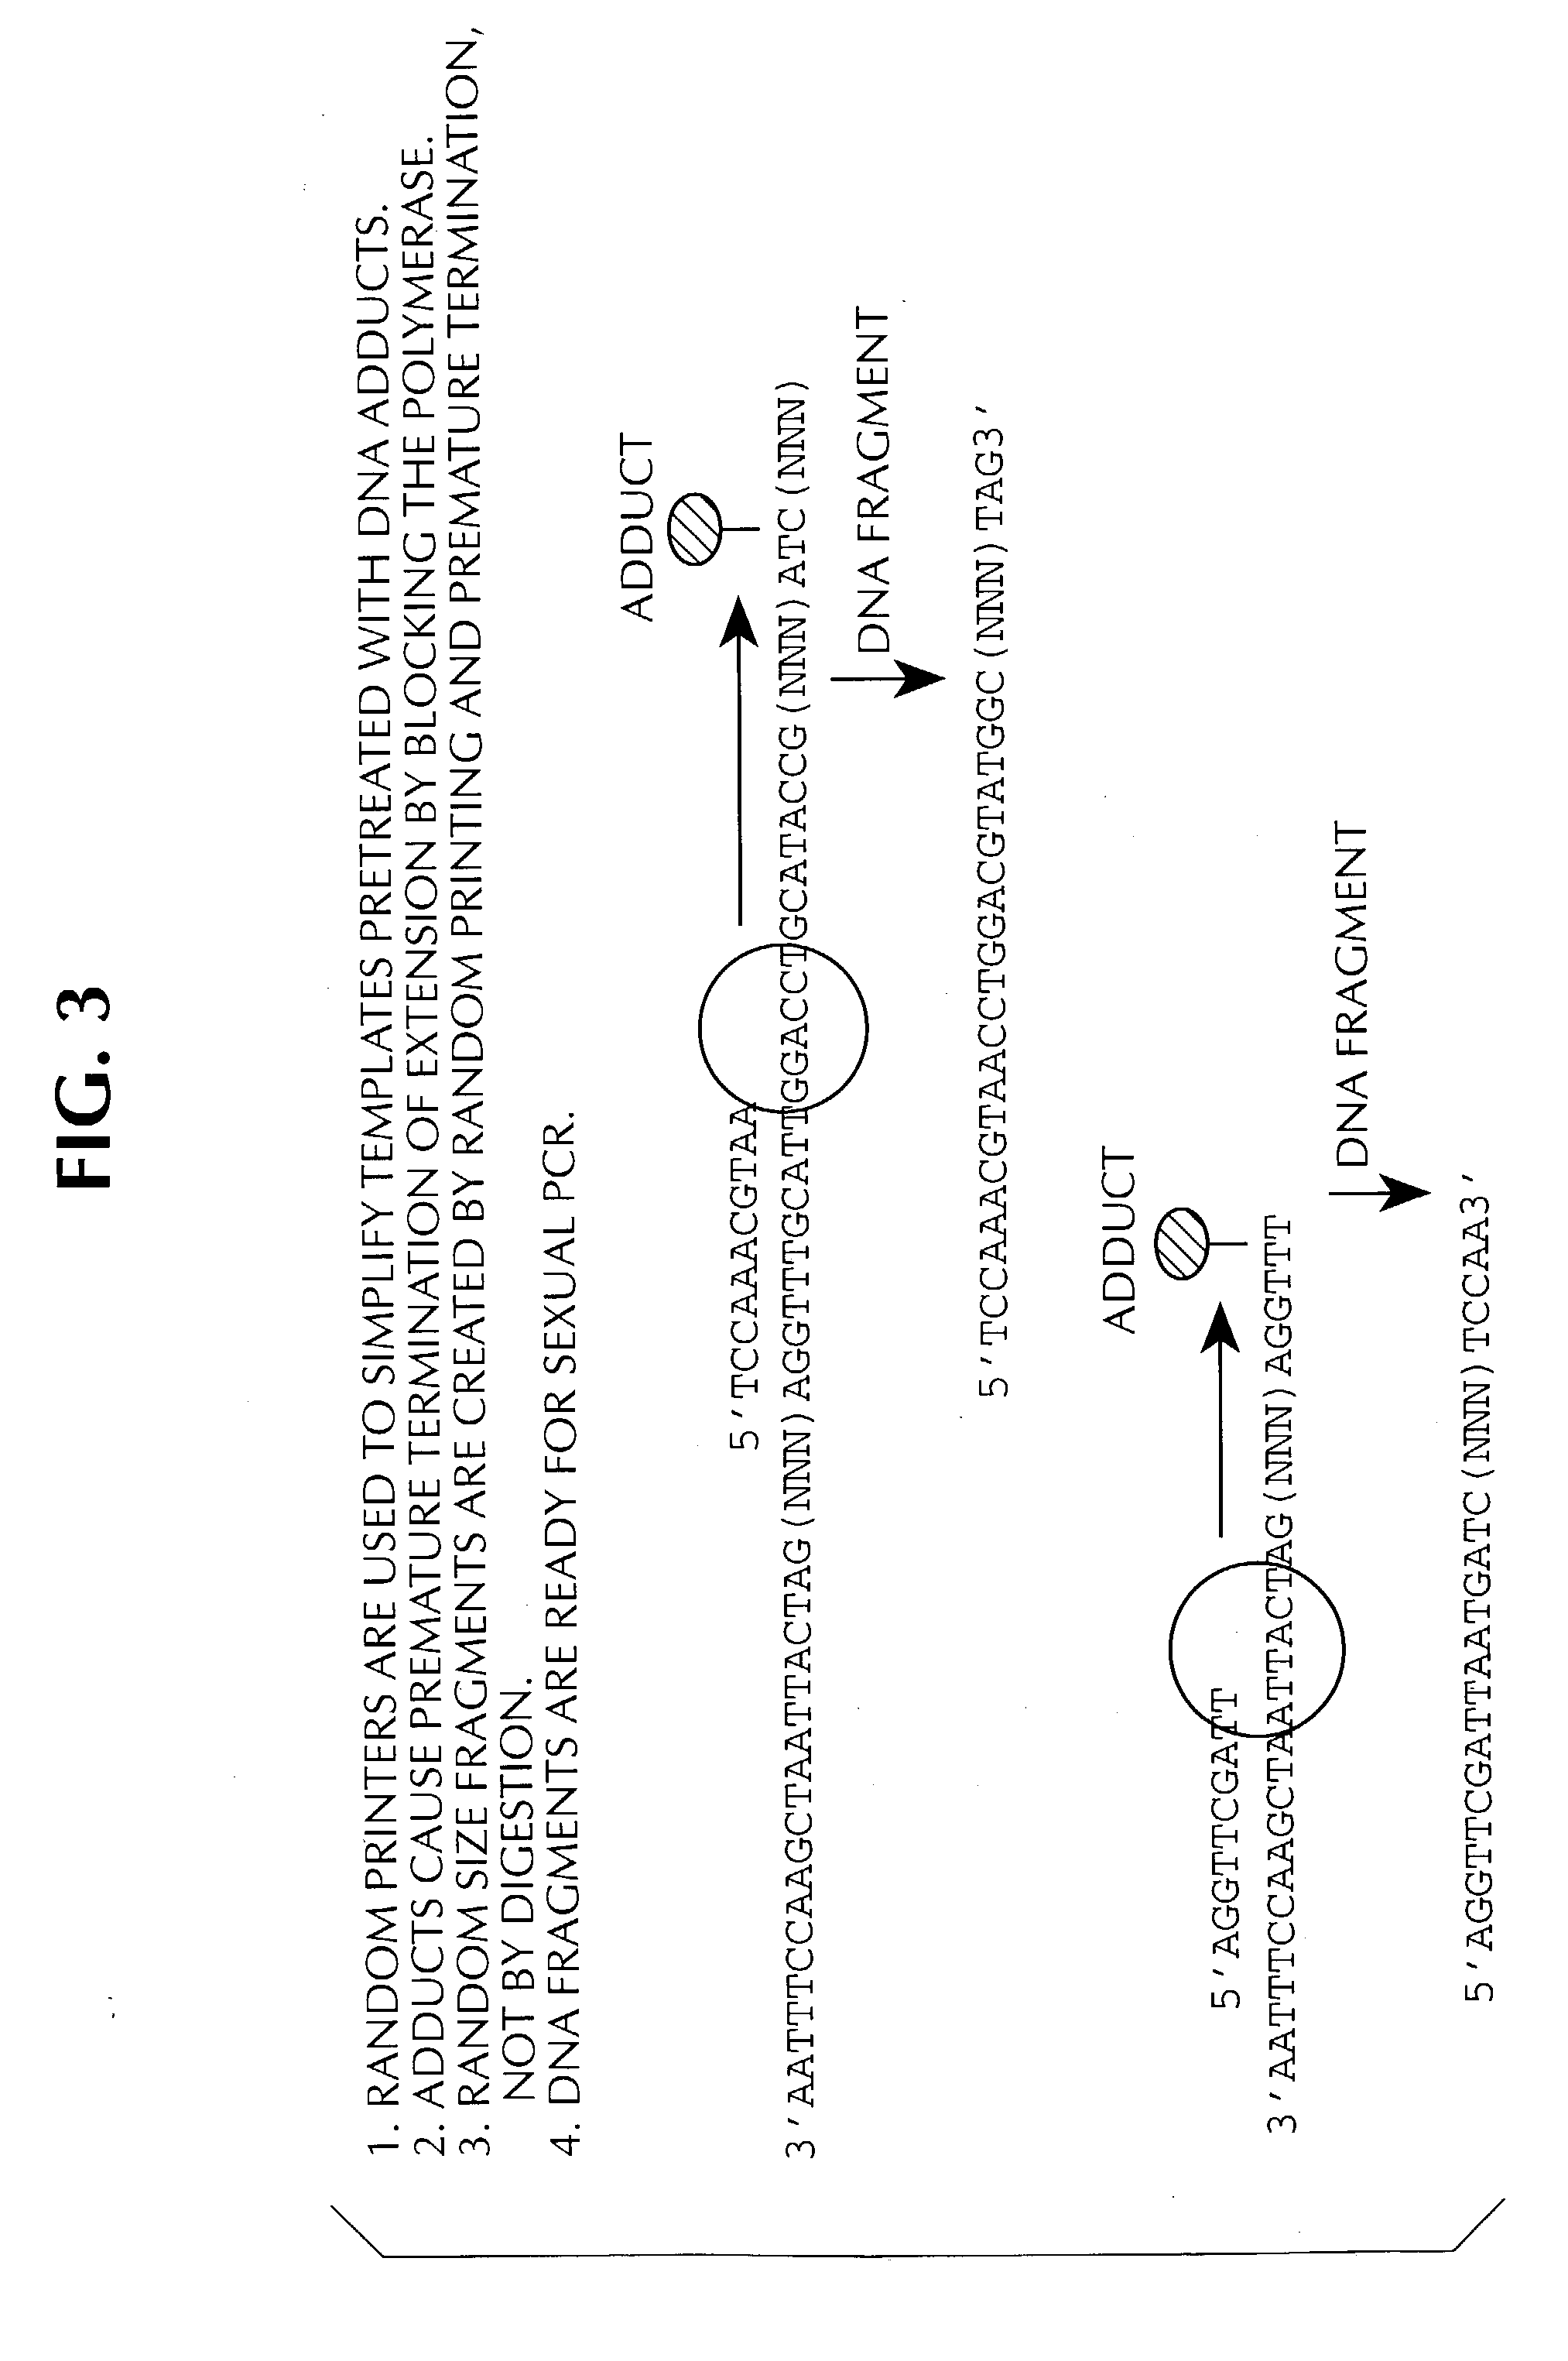 Method of DNA shuffling with polynucleotides produced by blocking or interrupting a synthesis or amplification process